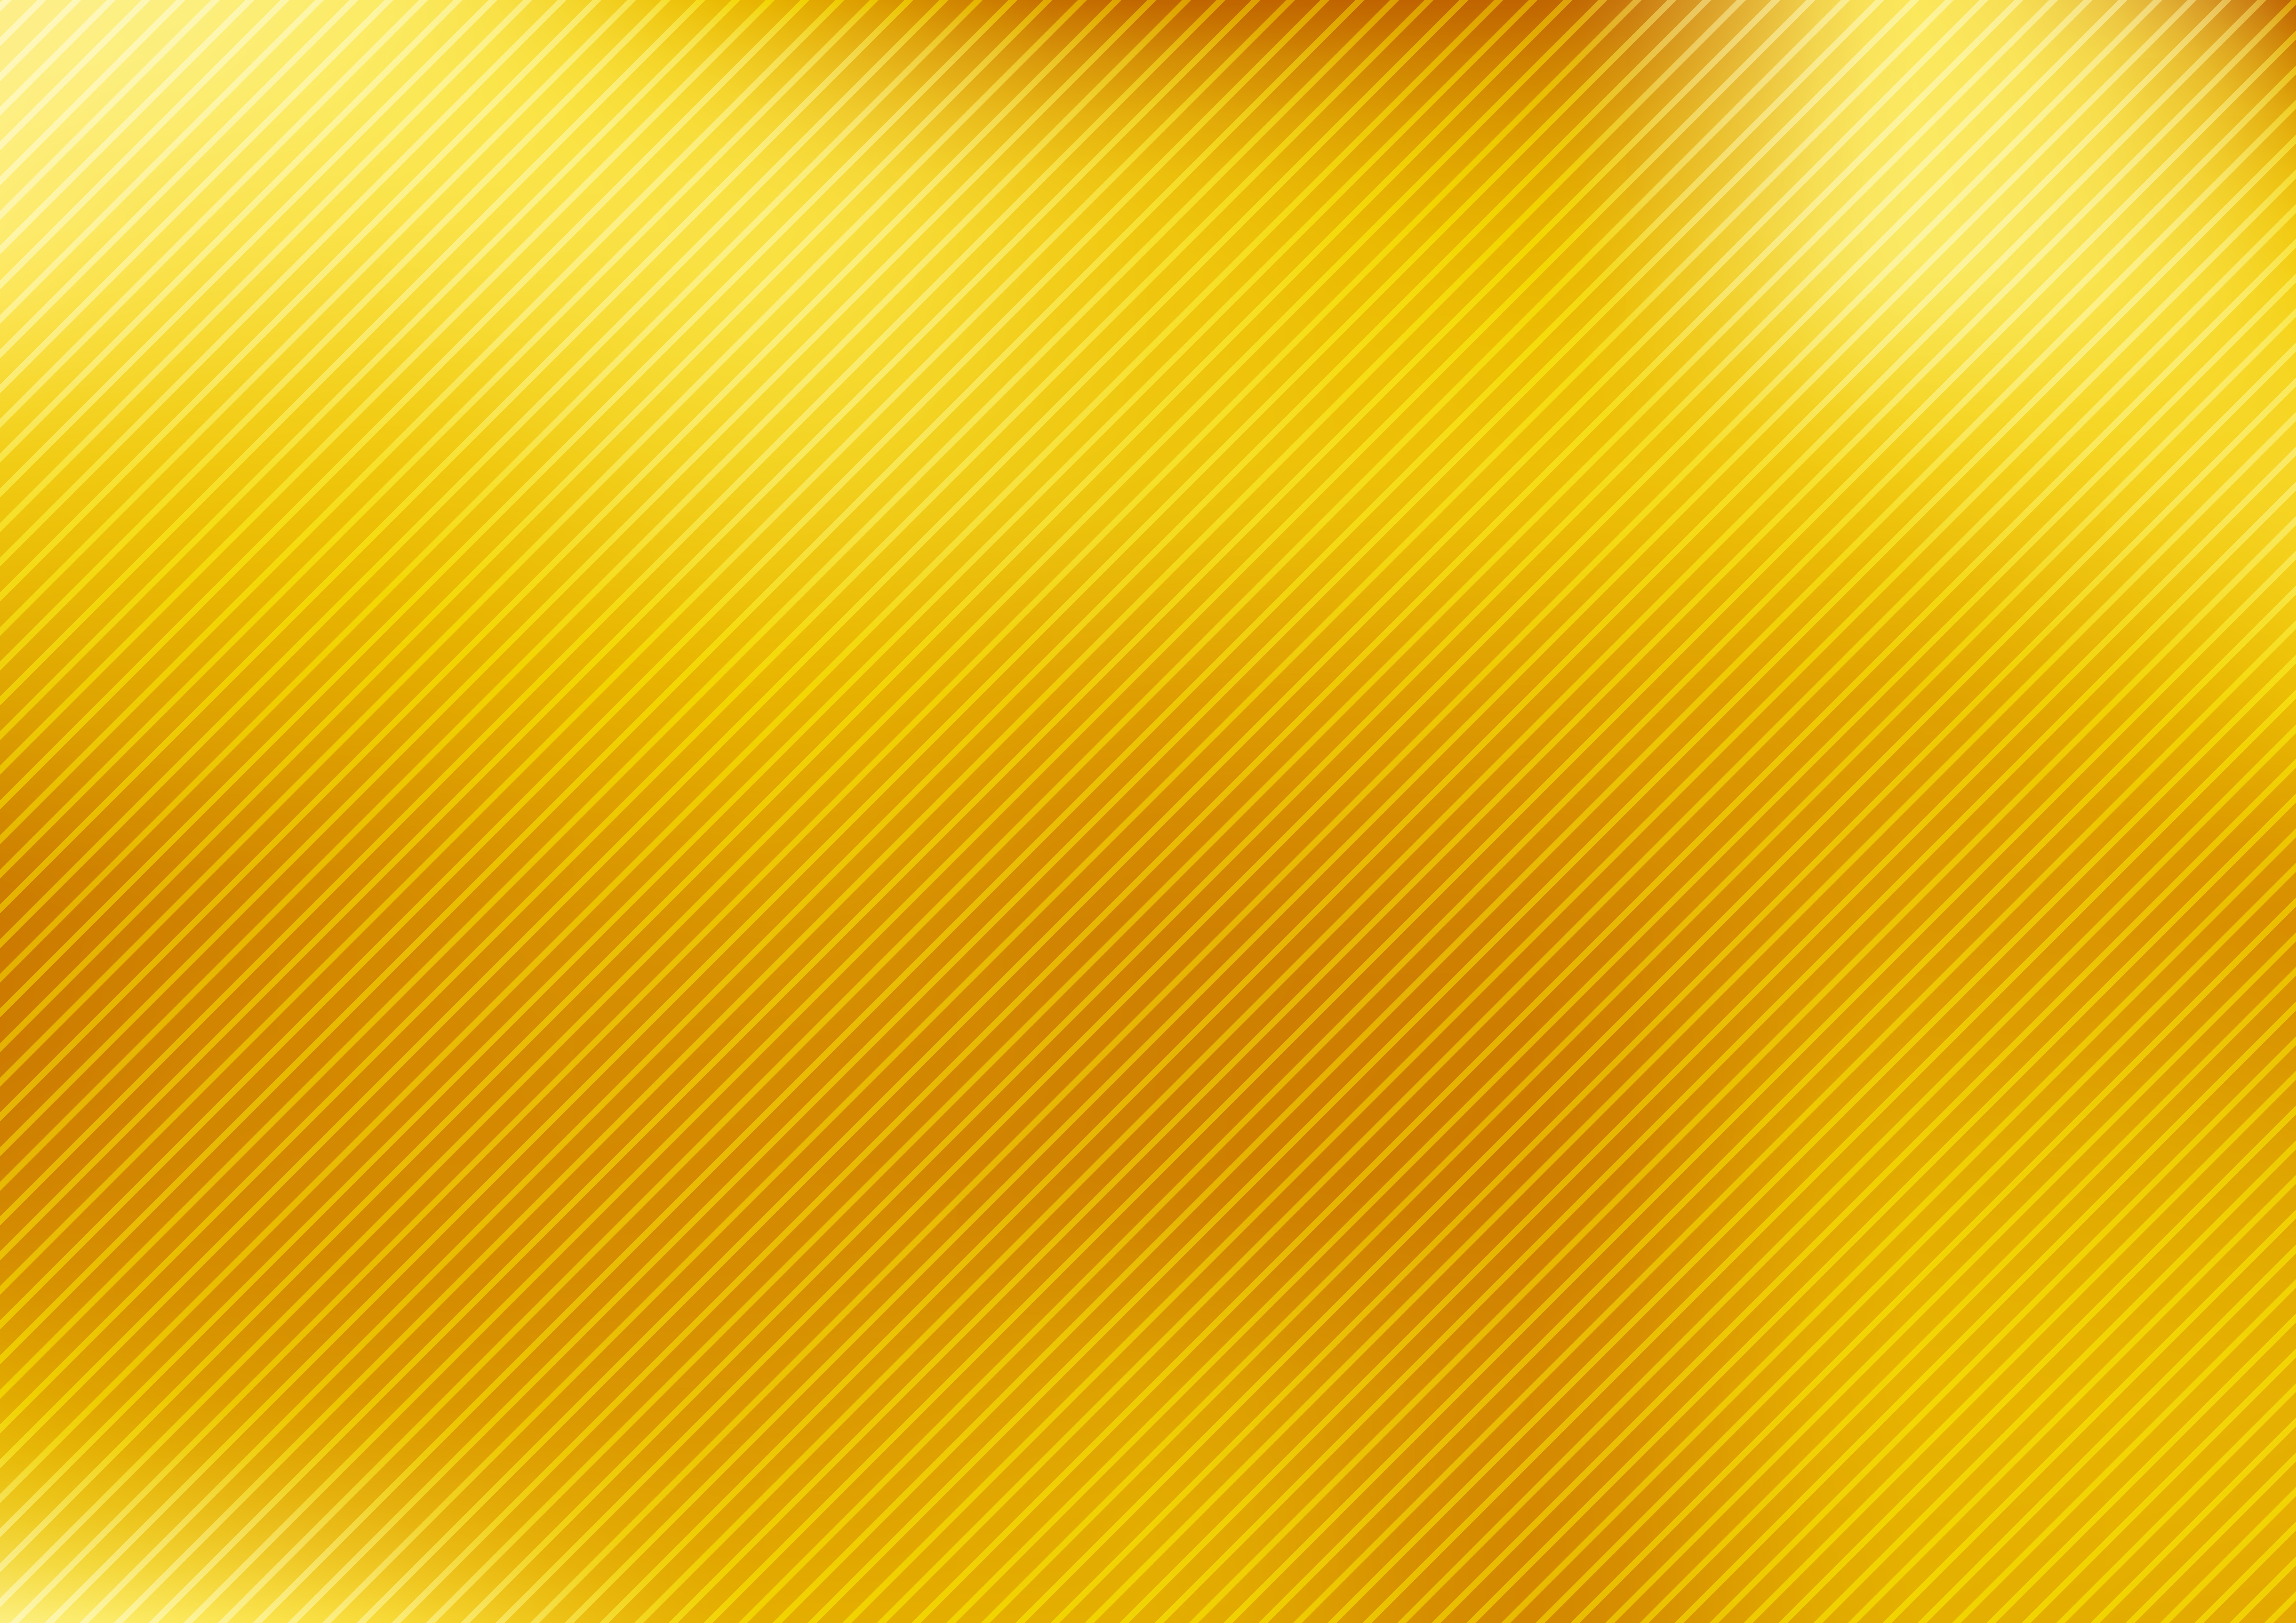 Abstract Gold Blurred Gradient Style Background With Diagonal